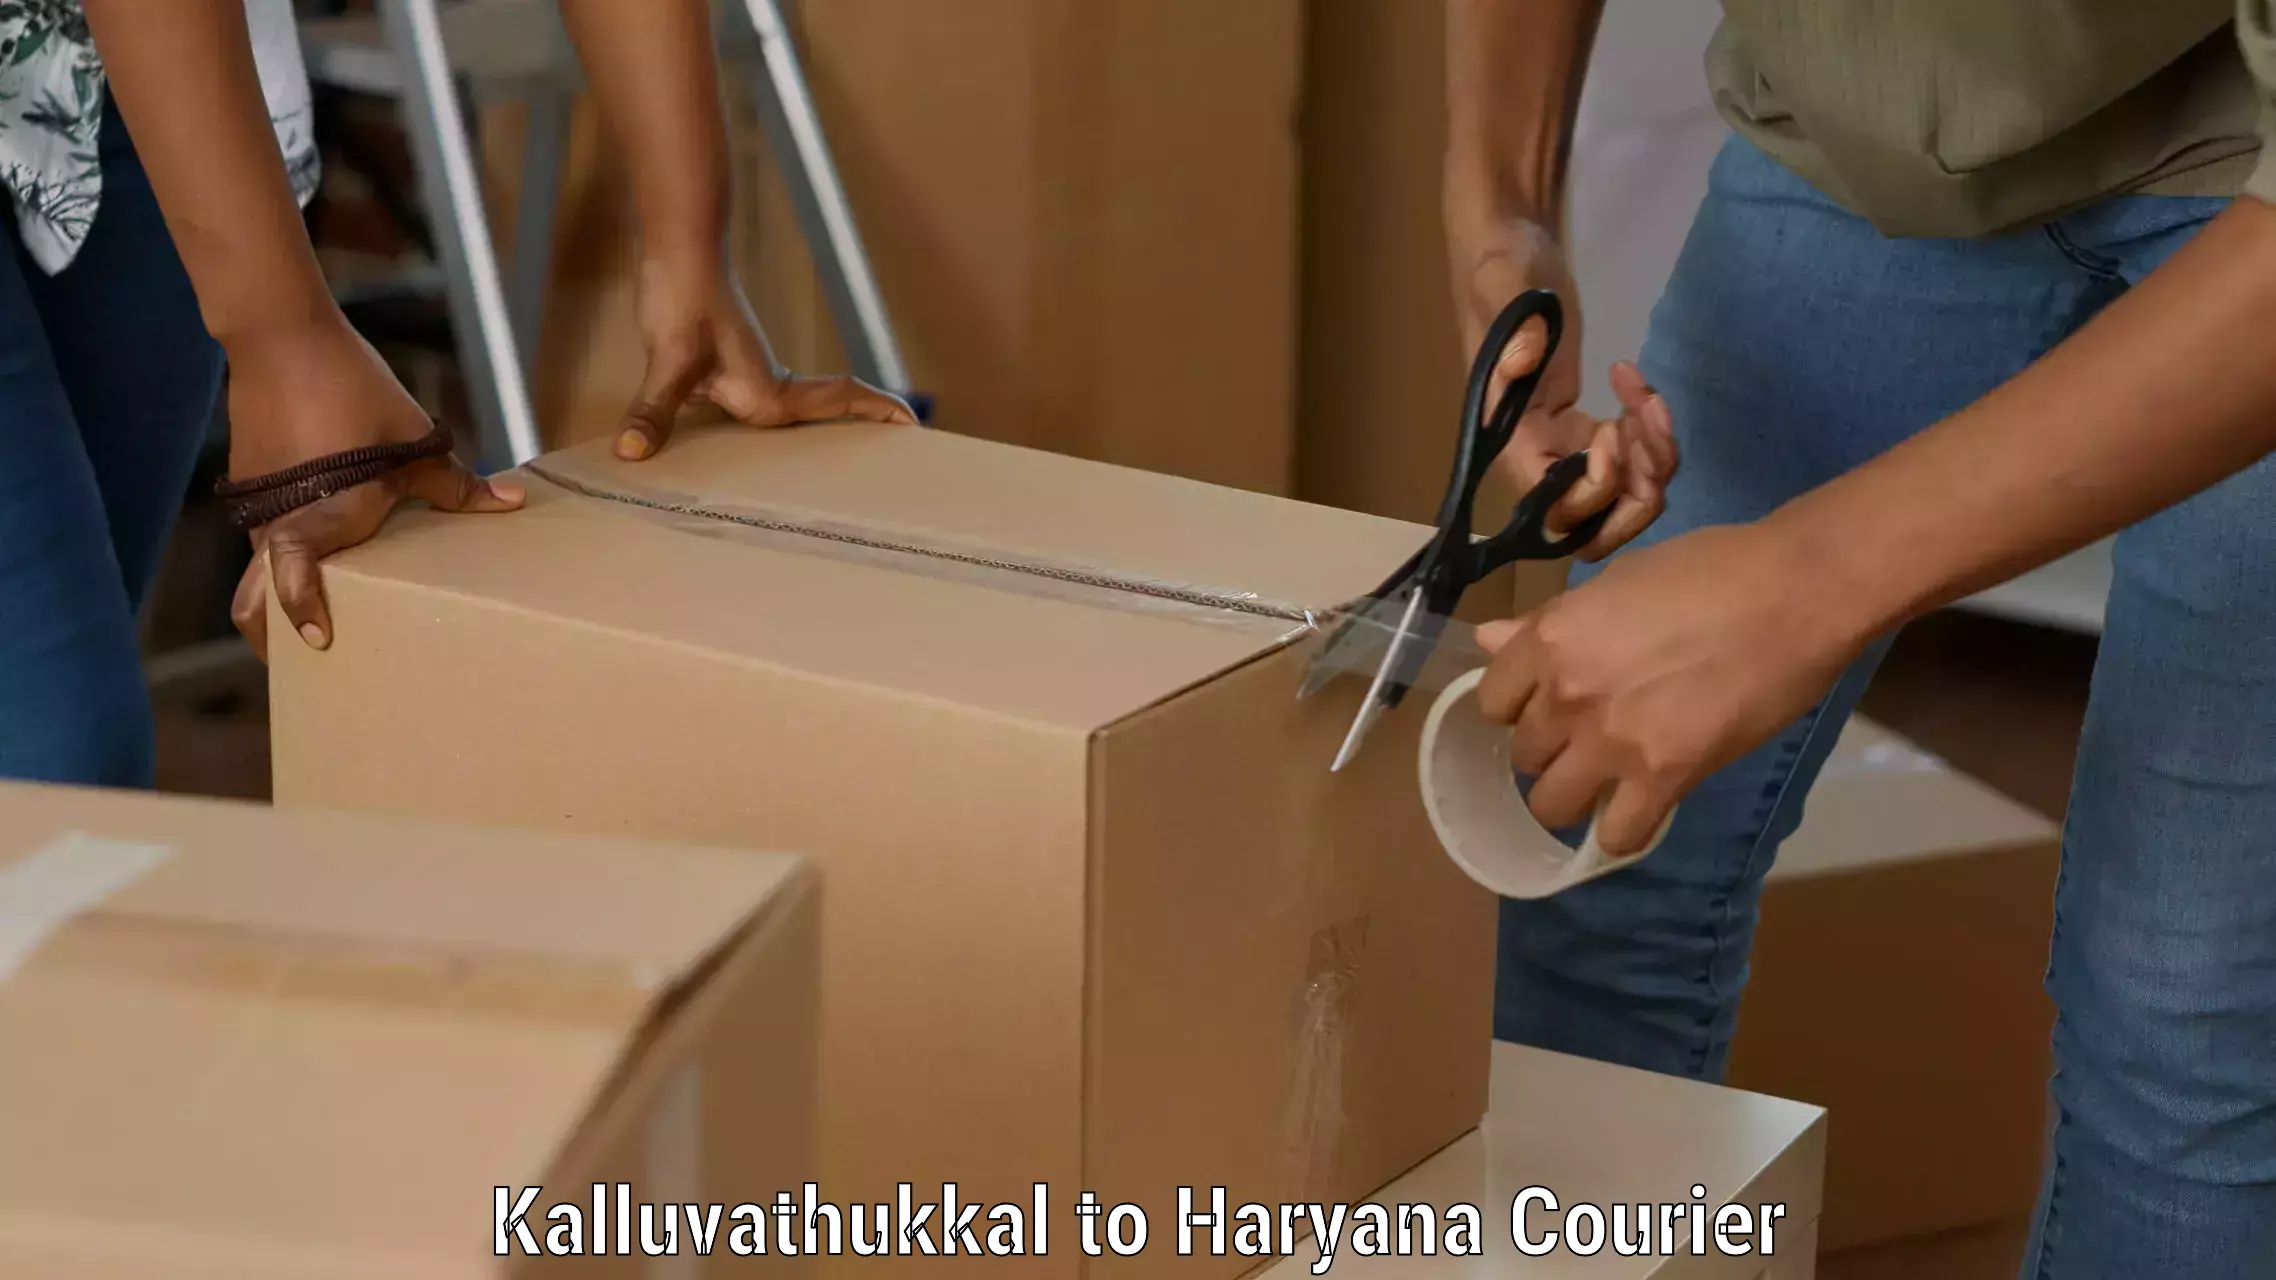 High-quality delivery services Kalluvathukkal to Chaudhary Charan Singh Haryana Agricultural University Hisar